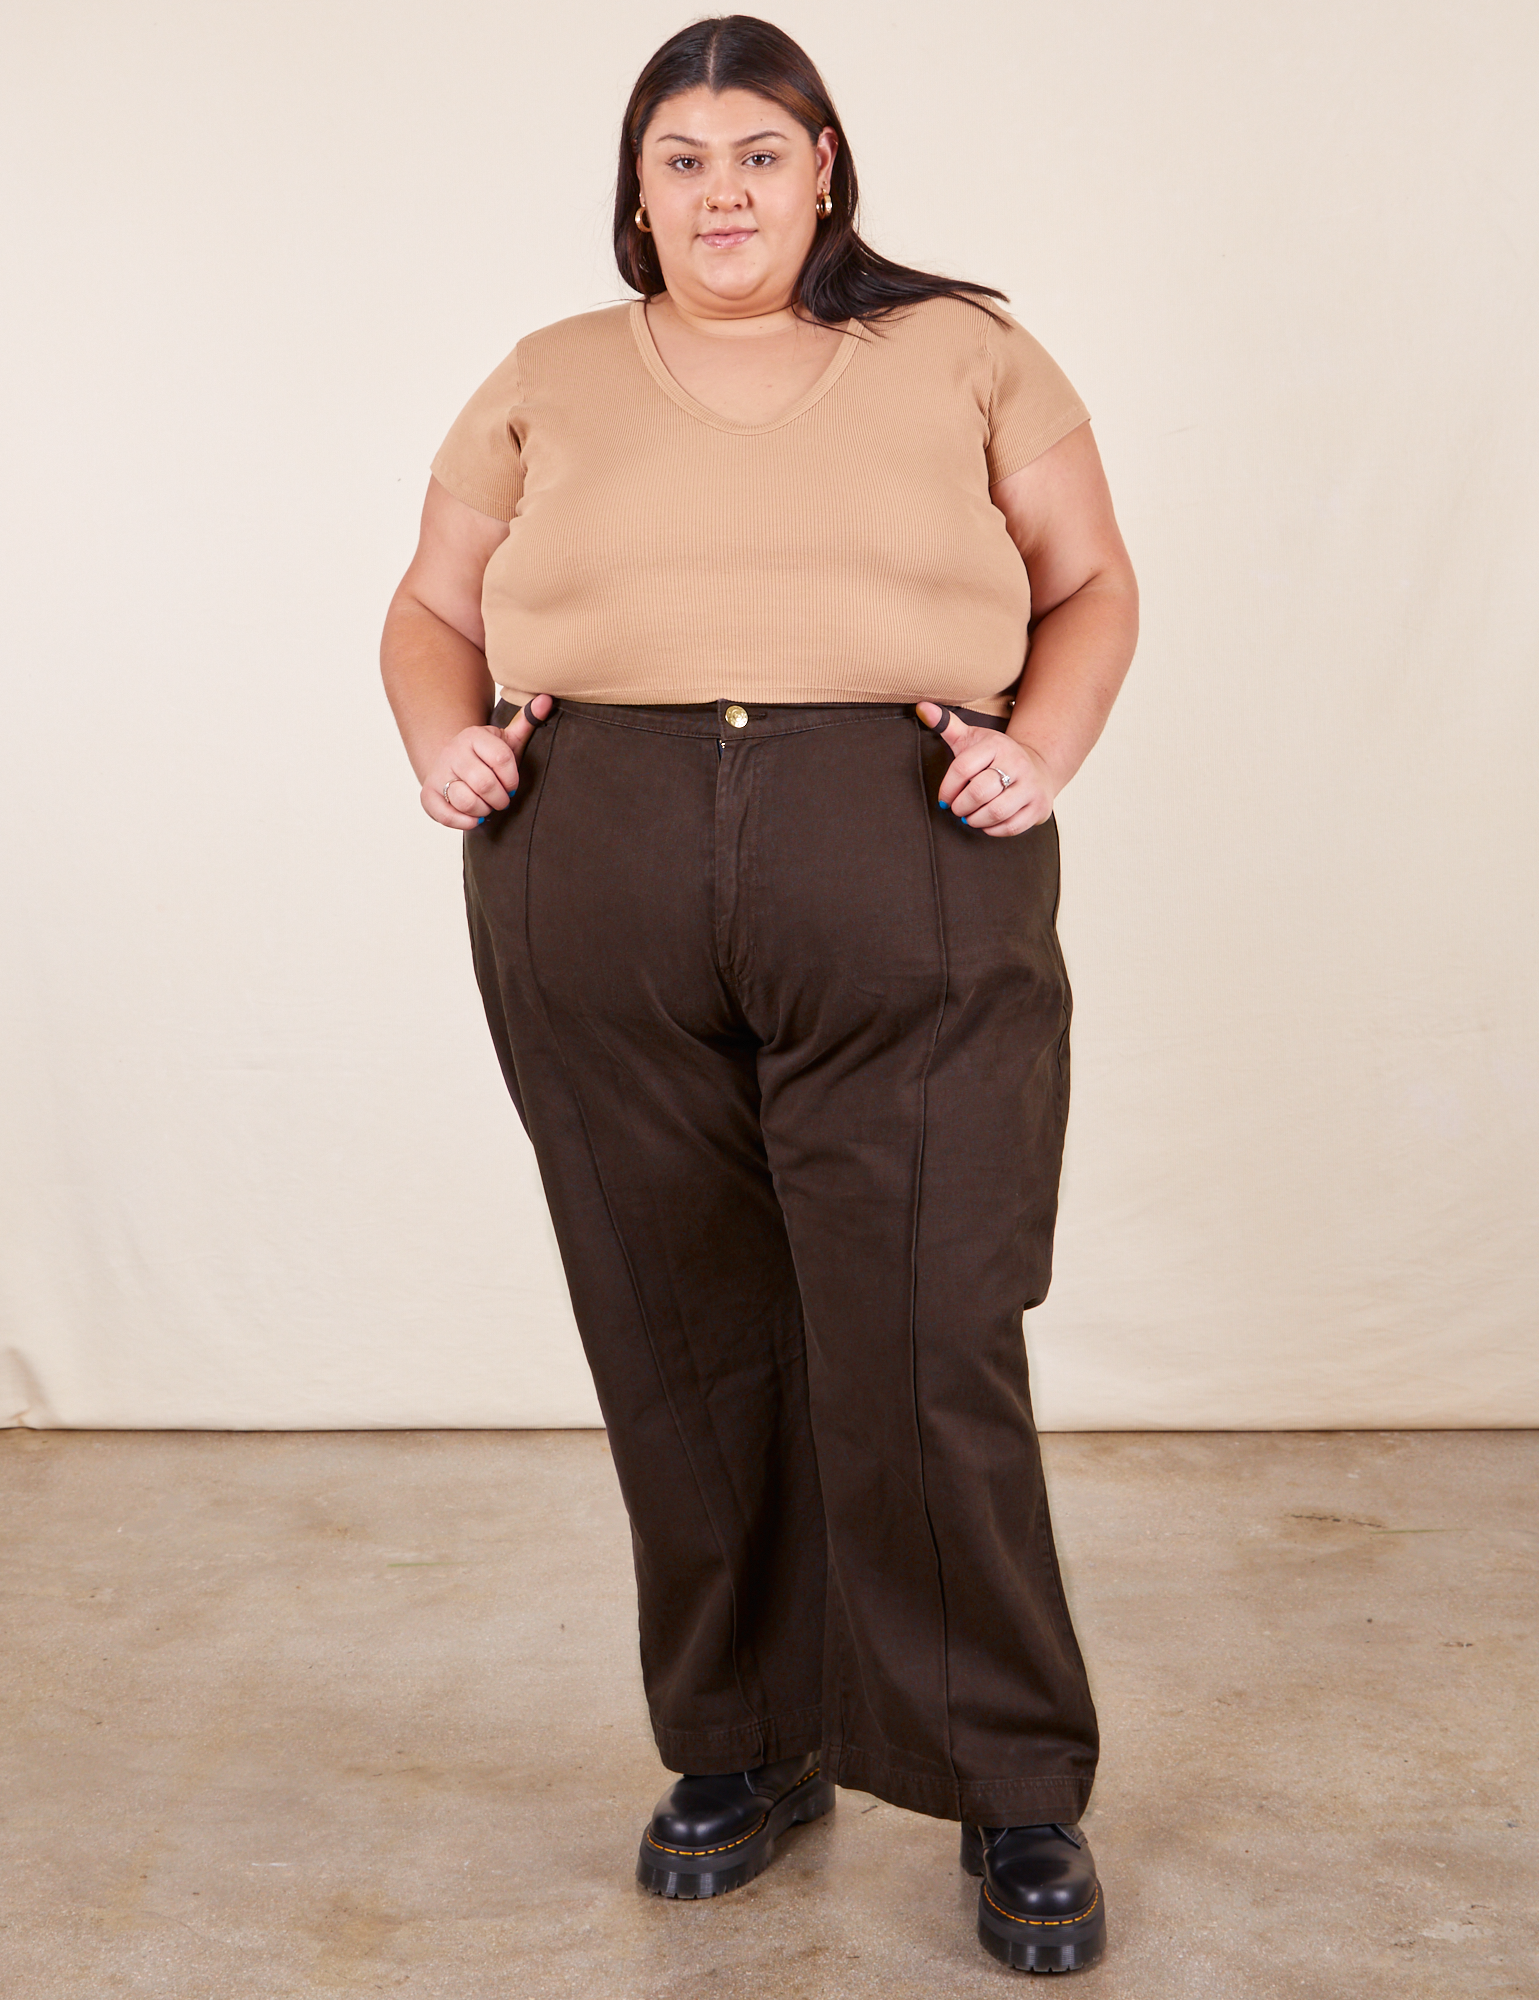 Sarita is 5&#39;7&quot; and wearing 3XL Western Pants in Espresso Brown paired with a tan V-Neck Tee